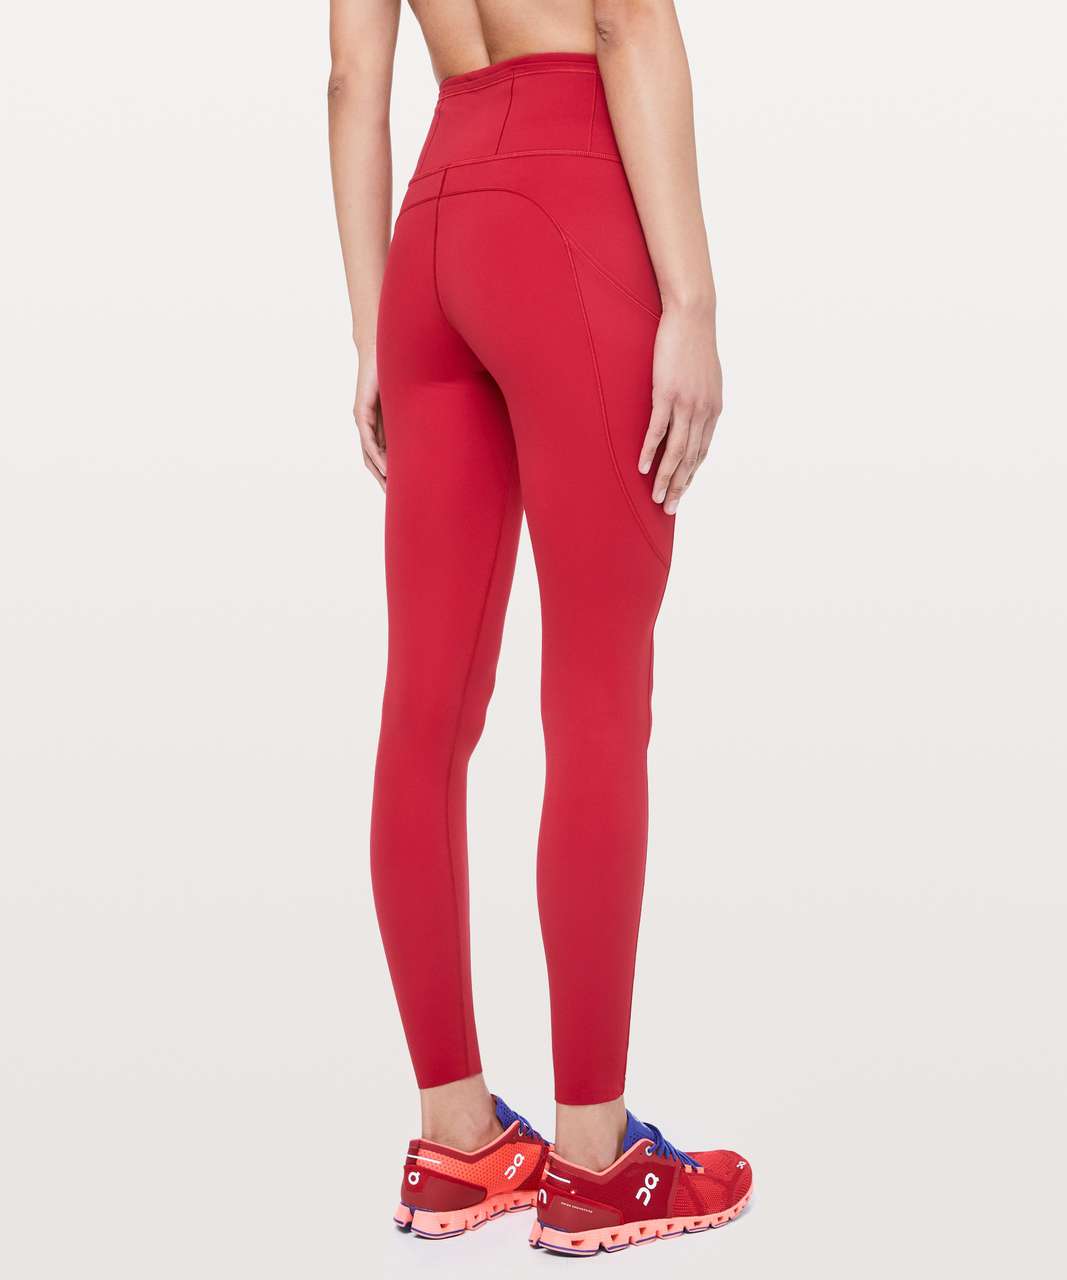 Lululemon Fast and Free Tight 28" *Non-Reflective - Dark Red